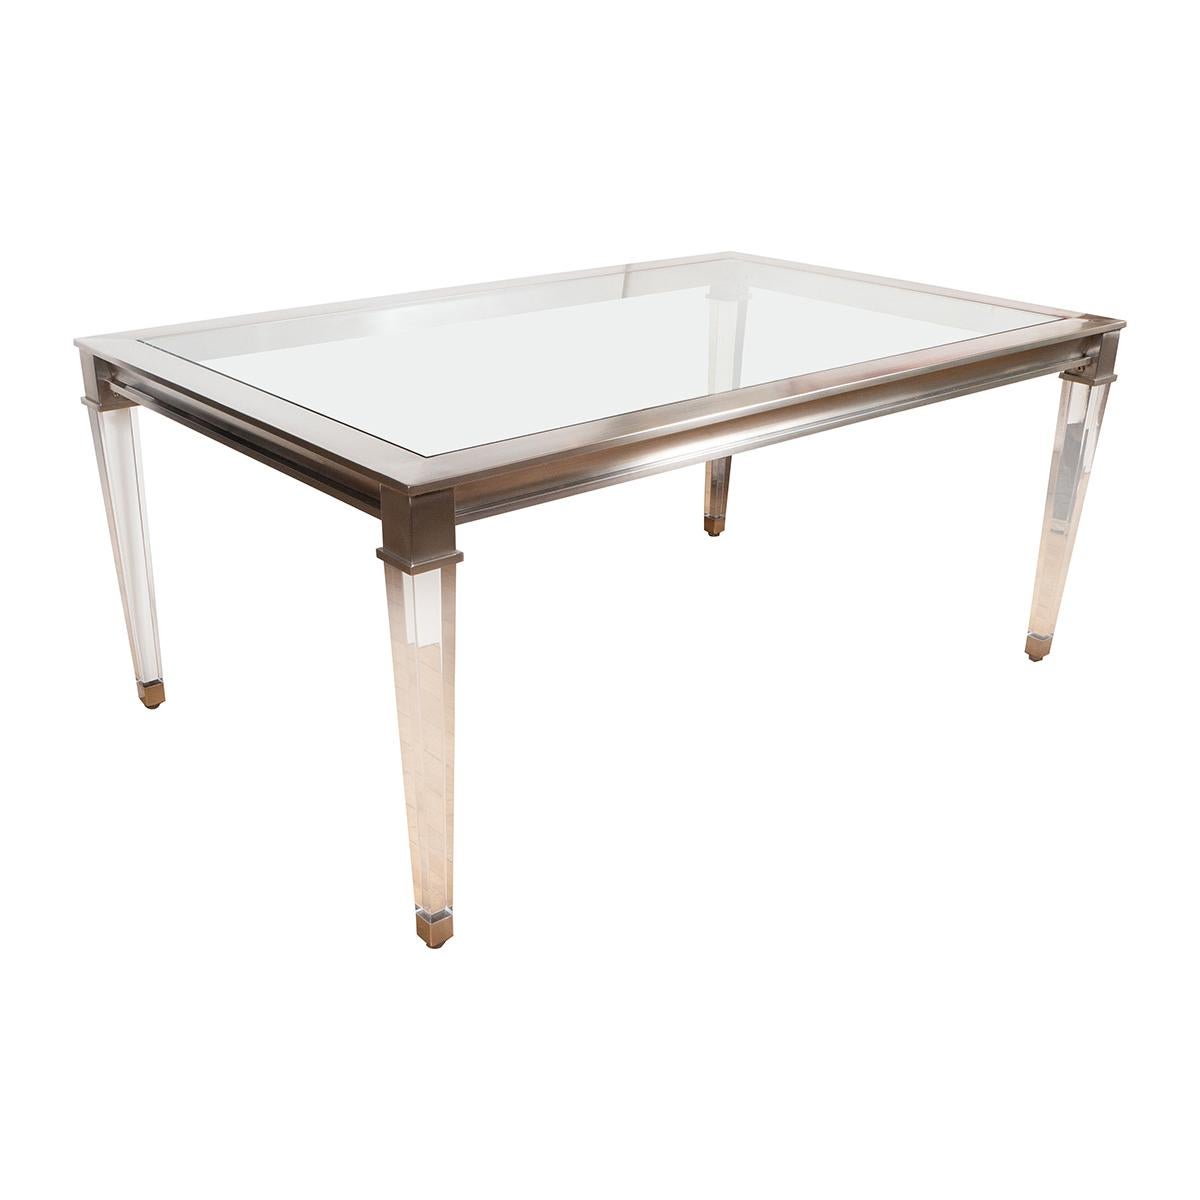 Rectangular brushed nickel coffee table For Sale